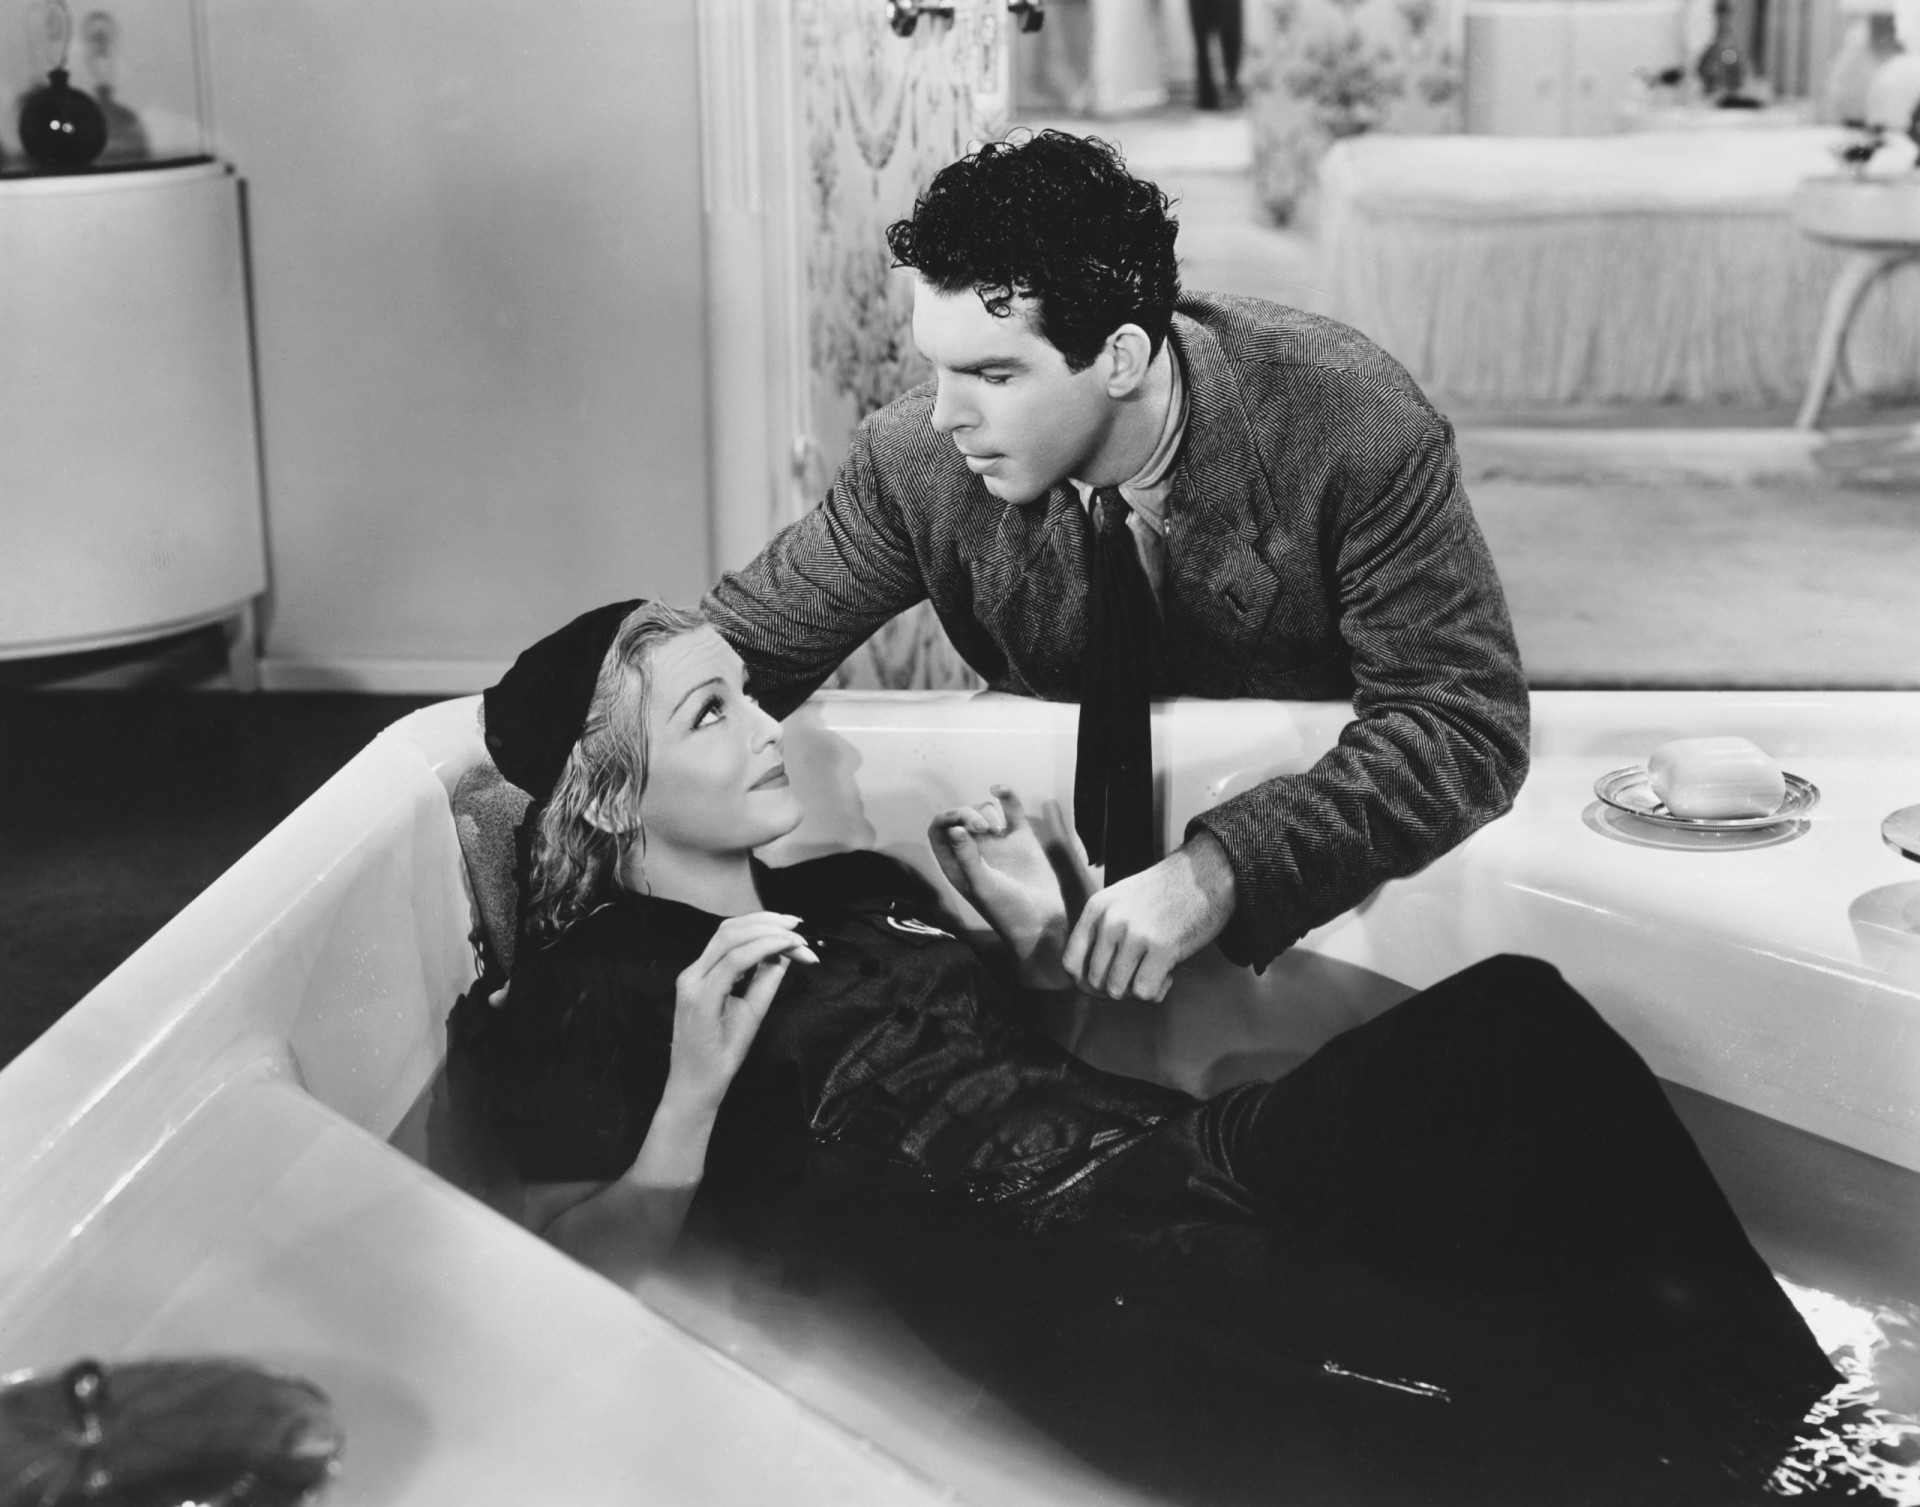 <p>Madeleine Carroll as Christopher West and Fred MacMurray as Chick O'Bannon engage in some bathtub antics in the romantic comedy 'Cafe Society.' Historically a popular name for boys, Christopher debuted as a girl's name in 1938 after Orson Welles named one of his daughters as such.</p><p><a href="https://www.msn.com/en-us/community/channel/vid-7xx8mnucu55yw63we9va2gwr7uihbxwc68fxqp25x6tg4ftibpra?cvid=94631541bc0f4f89bfd59158d696ad7e">Follow us and access great exclusive content every day</a></p>